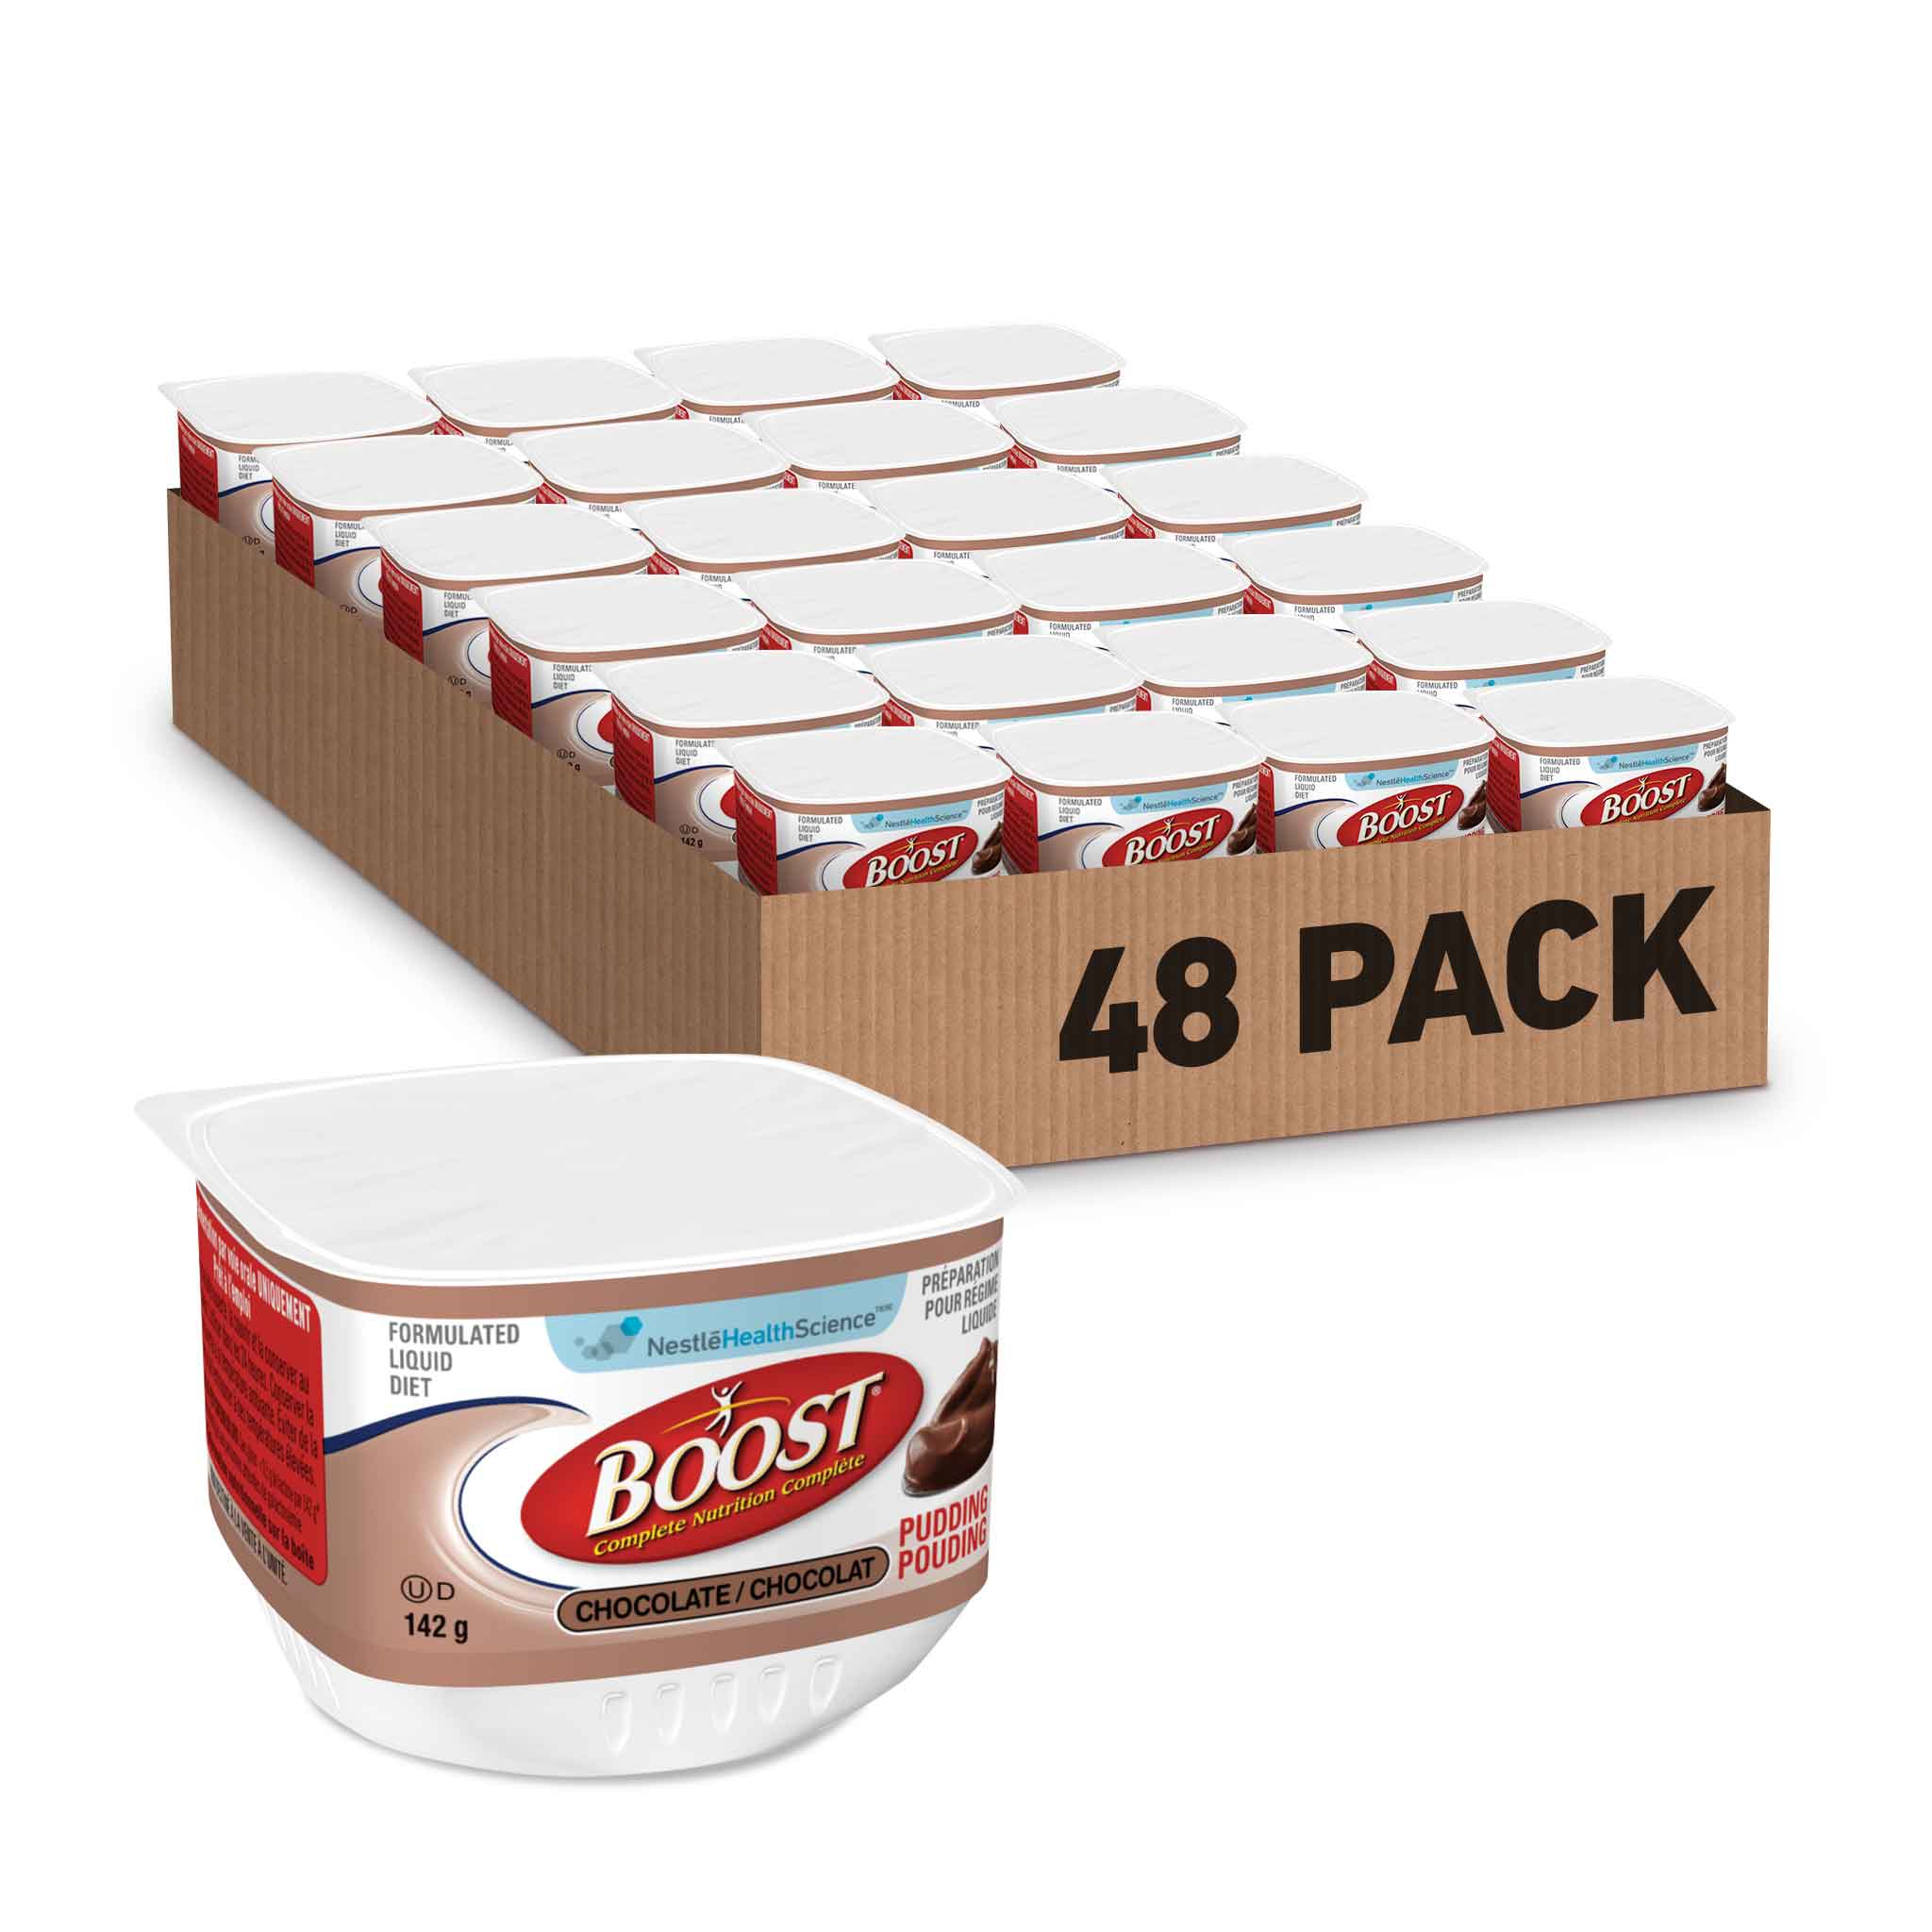 BOOST® Pudding Chocolate, 48 cups x 142g each